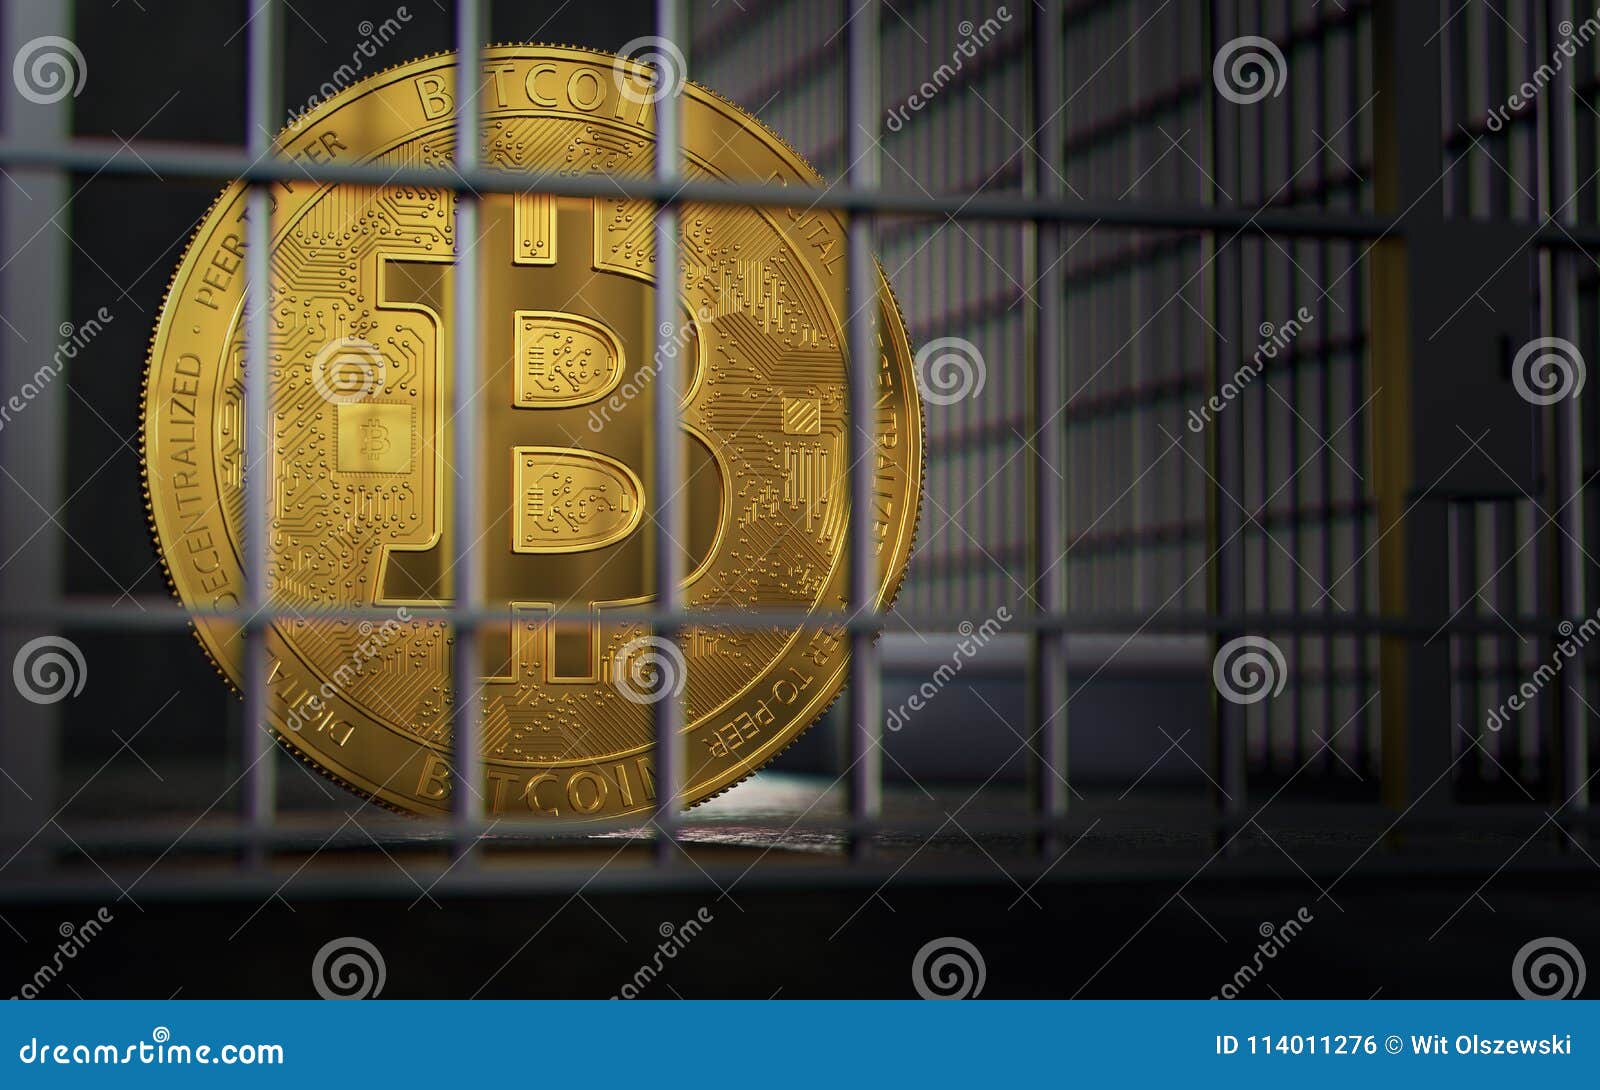 bitcoin ban, imprison or illegal. big troubles of bitcoin or other cryptocurrencies. 3d rendering